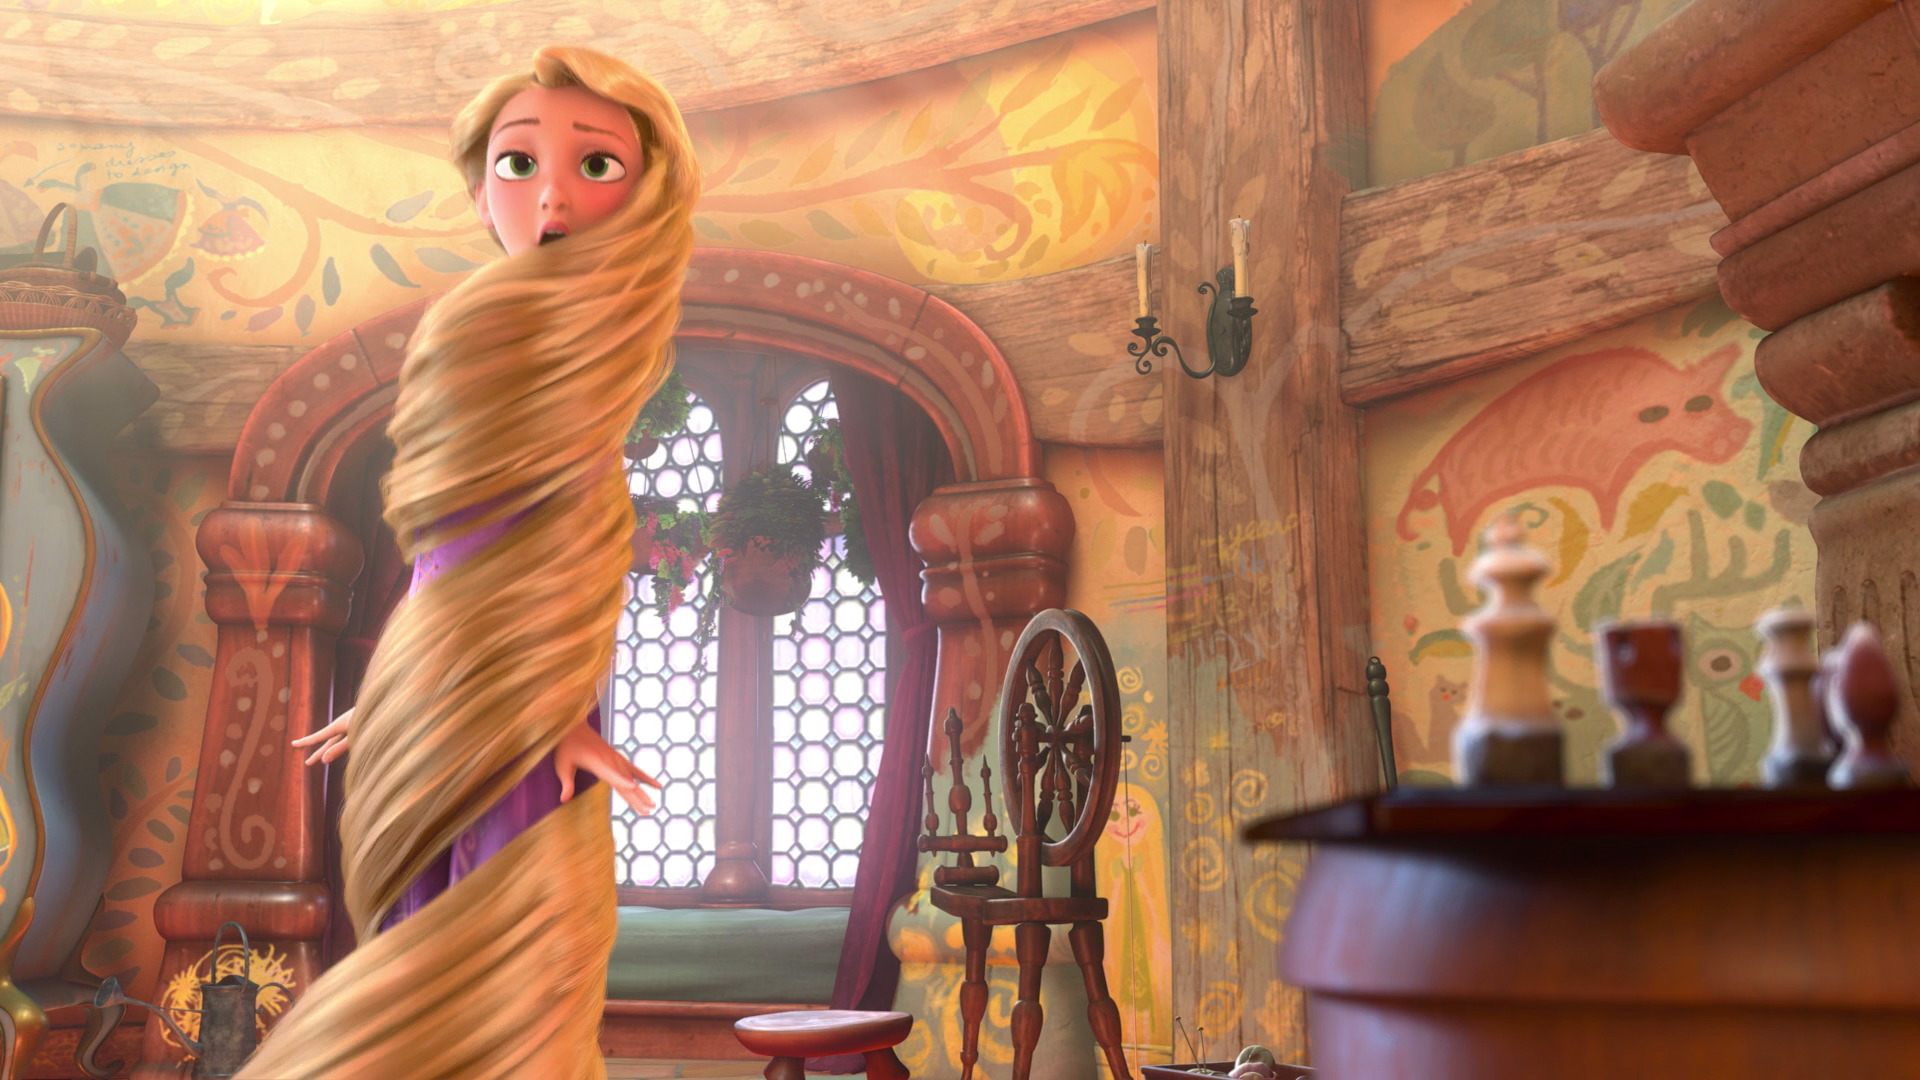 Princess Rapunzel (from Tangled) Images on Fanpop.